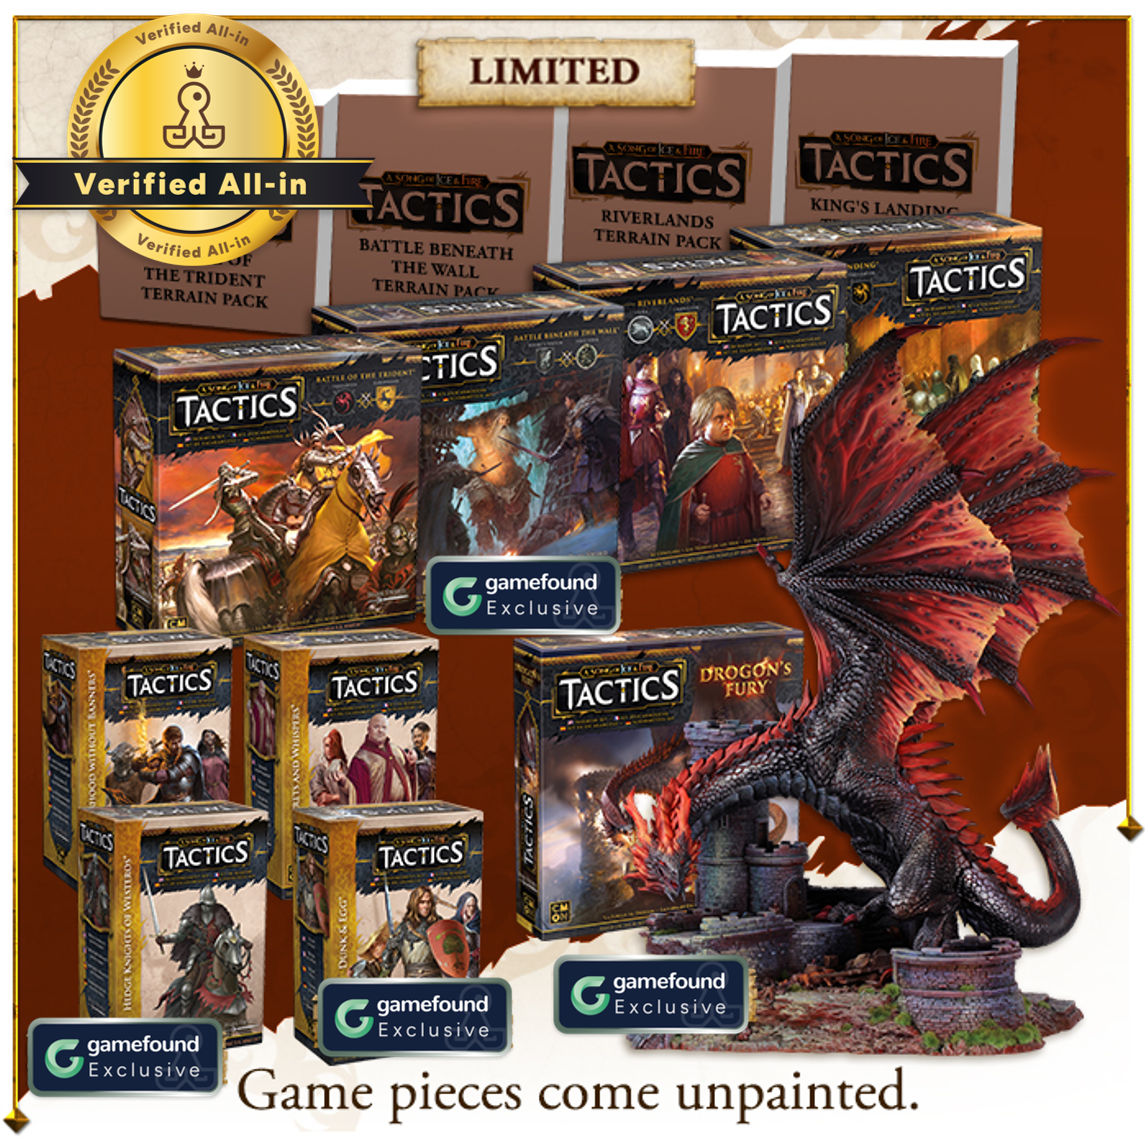 Crowdfunding Exclusive A Song of Ice and Fire: Tactics Seven Kingdoms Pledge with Verified All-In Certification by Board Game Exclusives